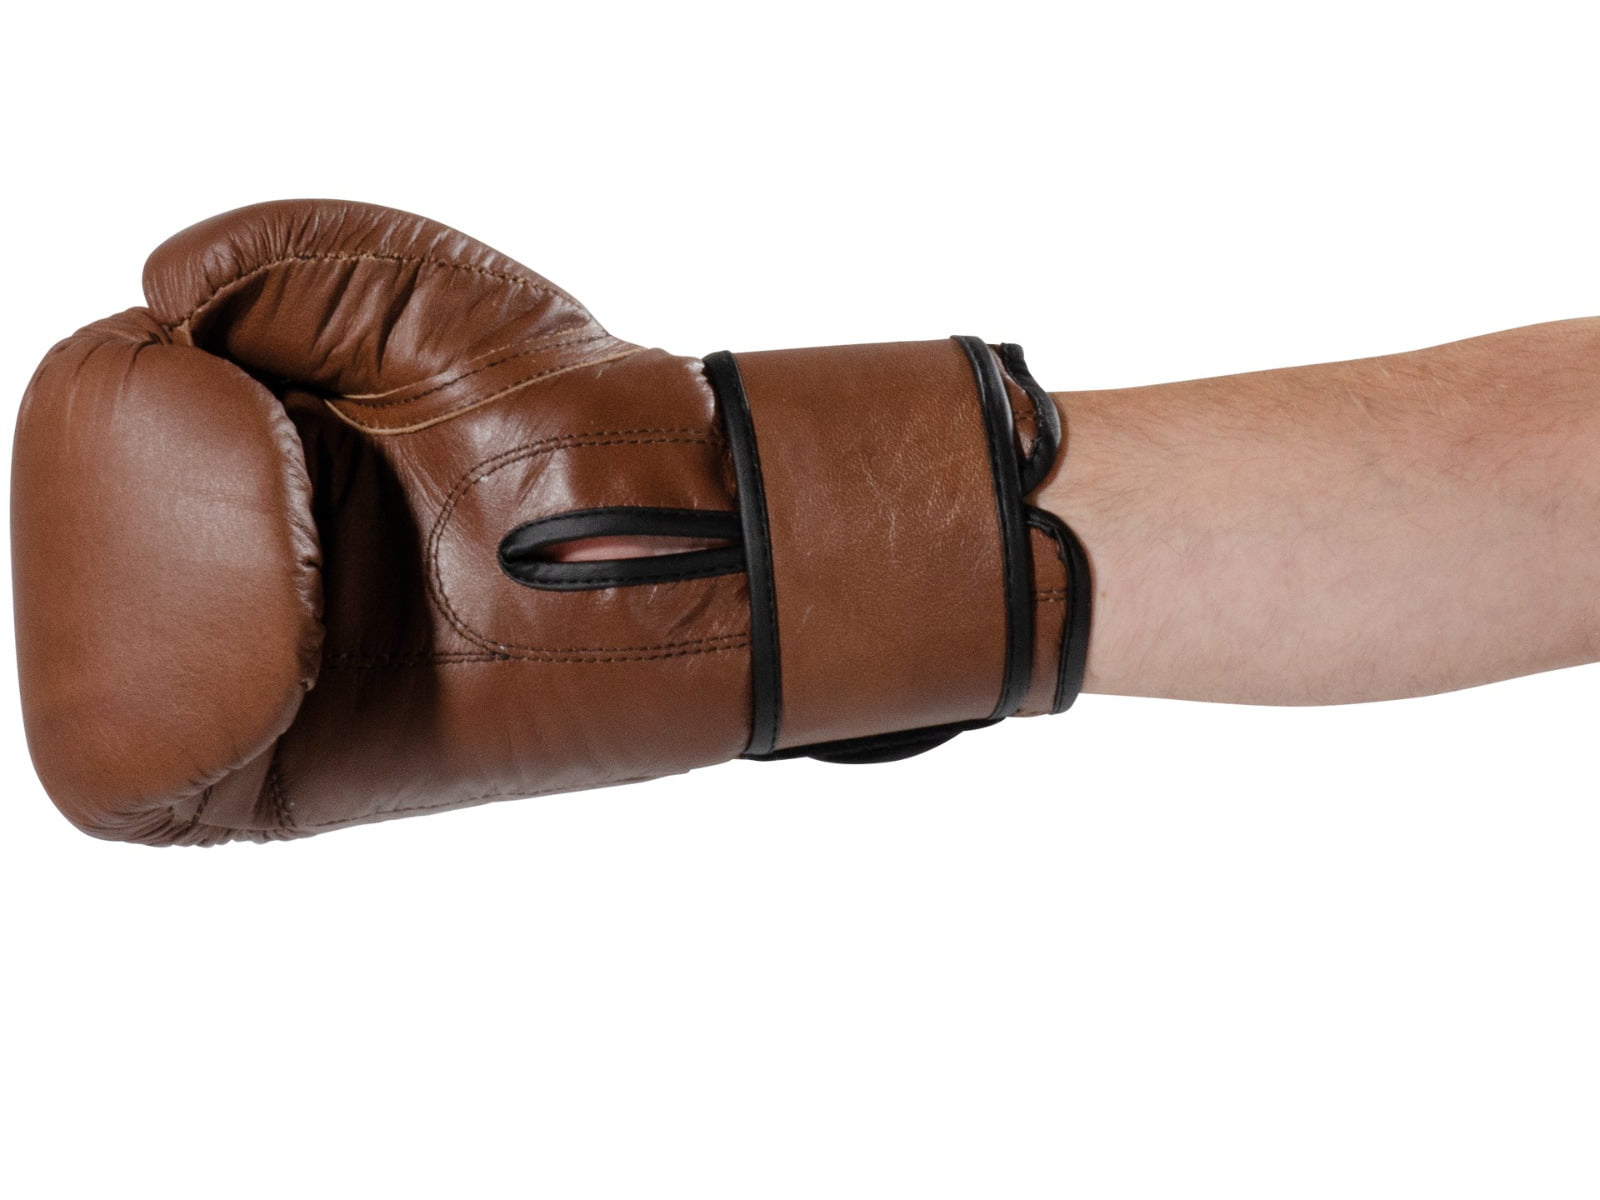 leather vintage / retro brown boxing gloves 5